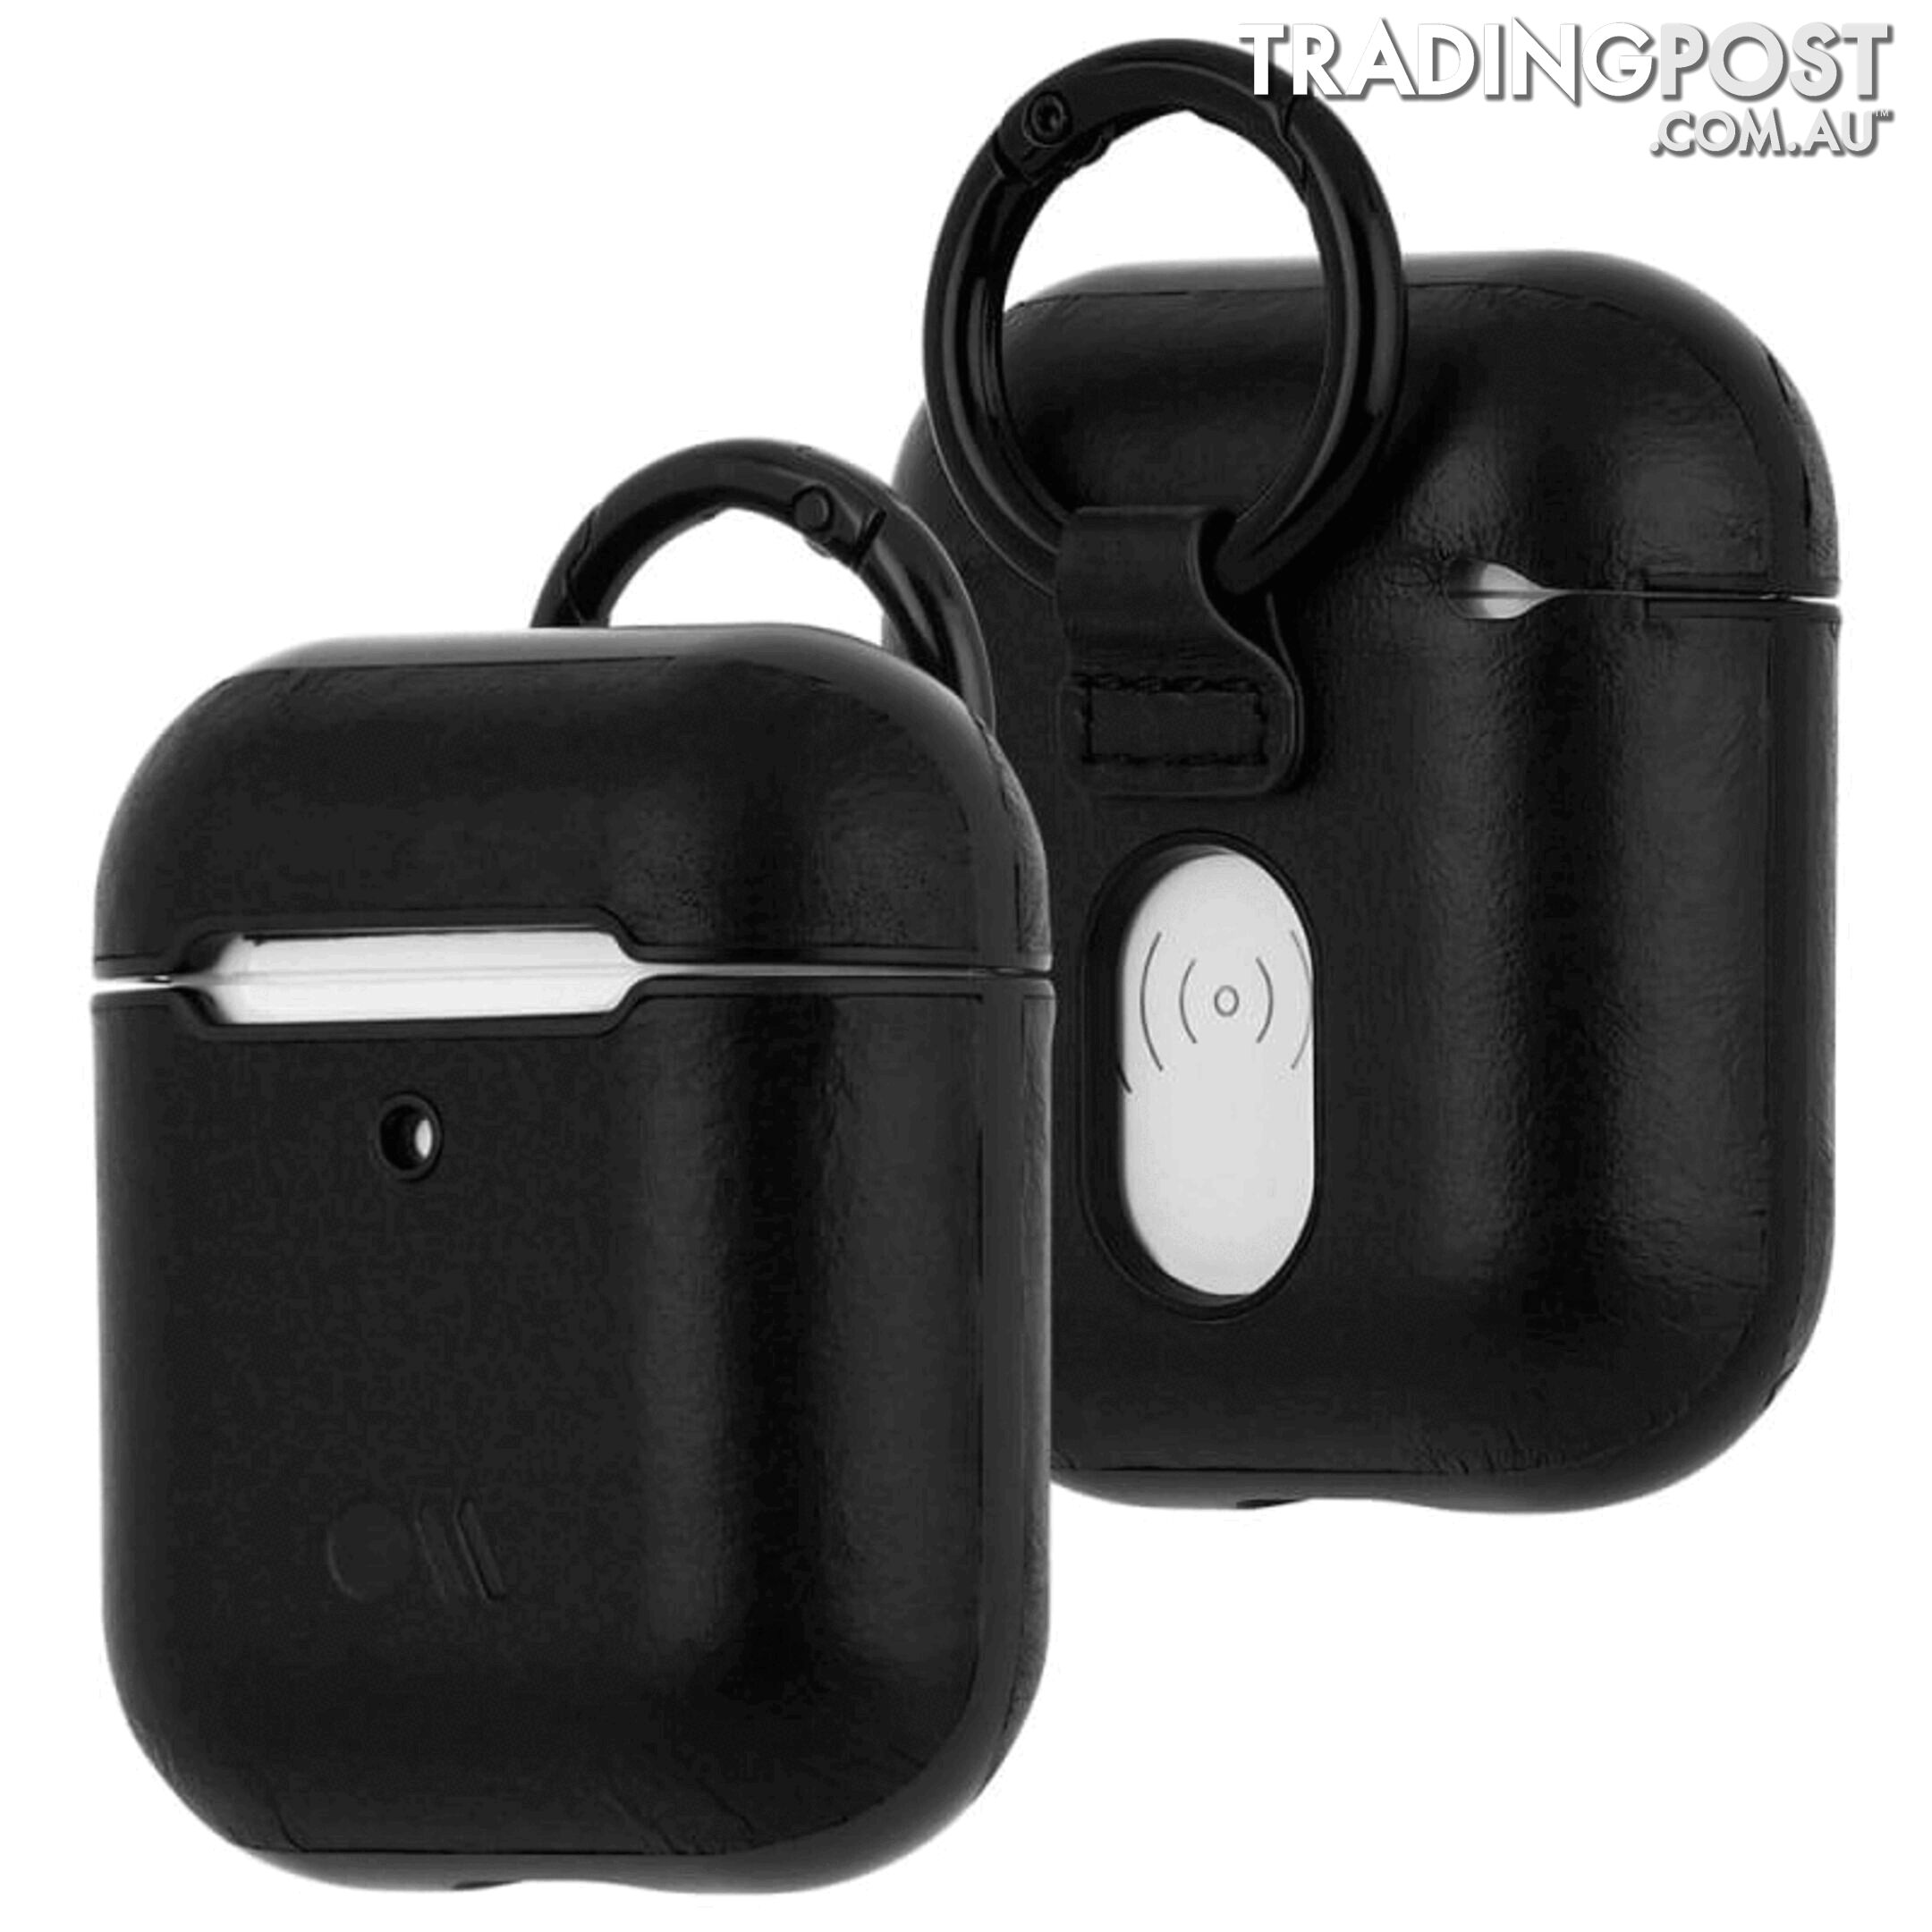 Case-Mate Leather Case For Air Pods - Case-Mate - Brown - 846127185363